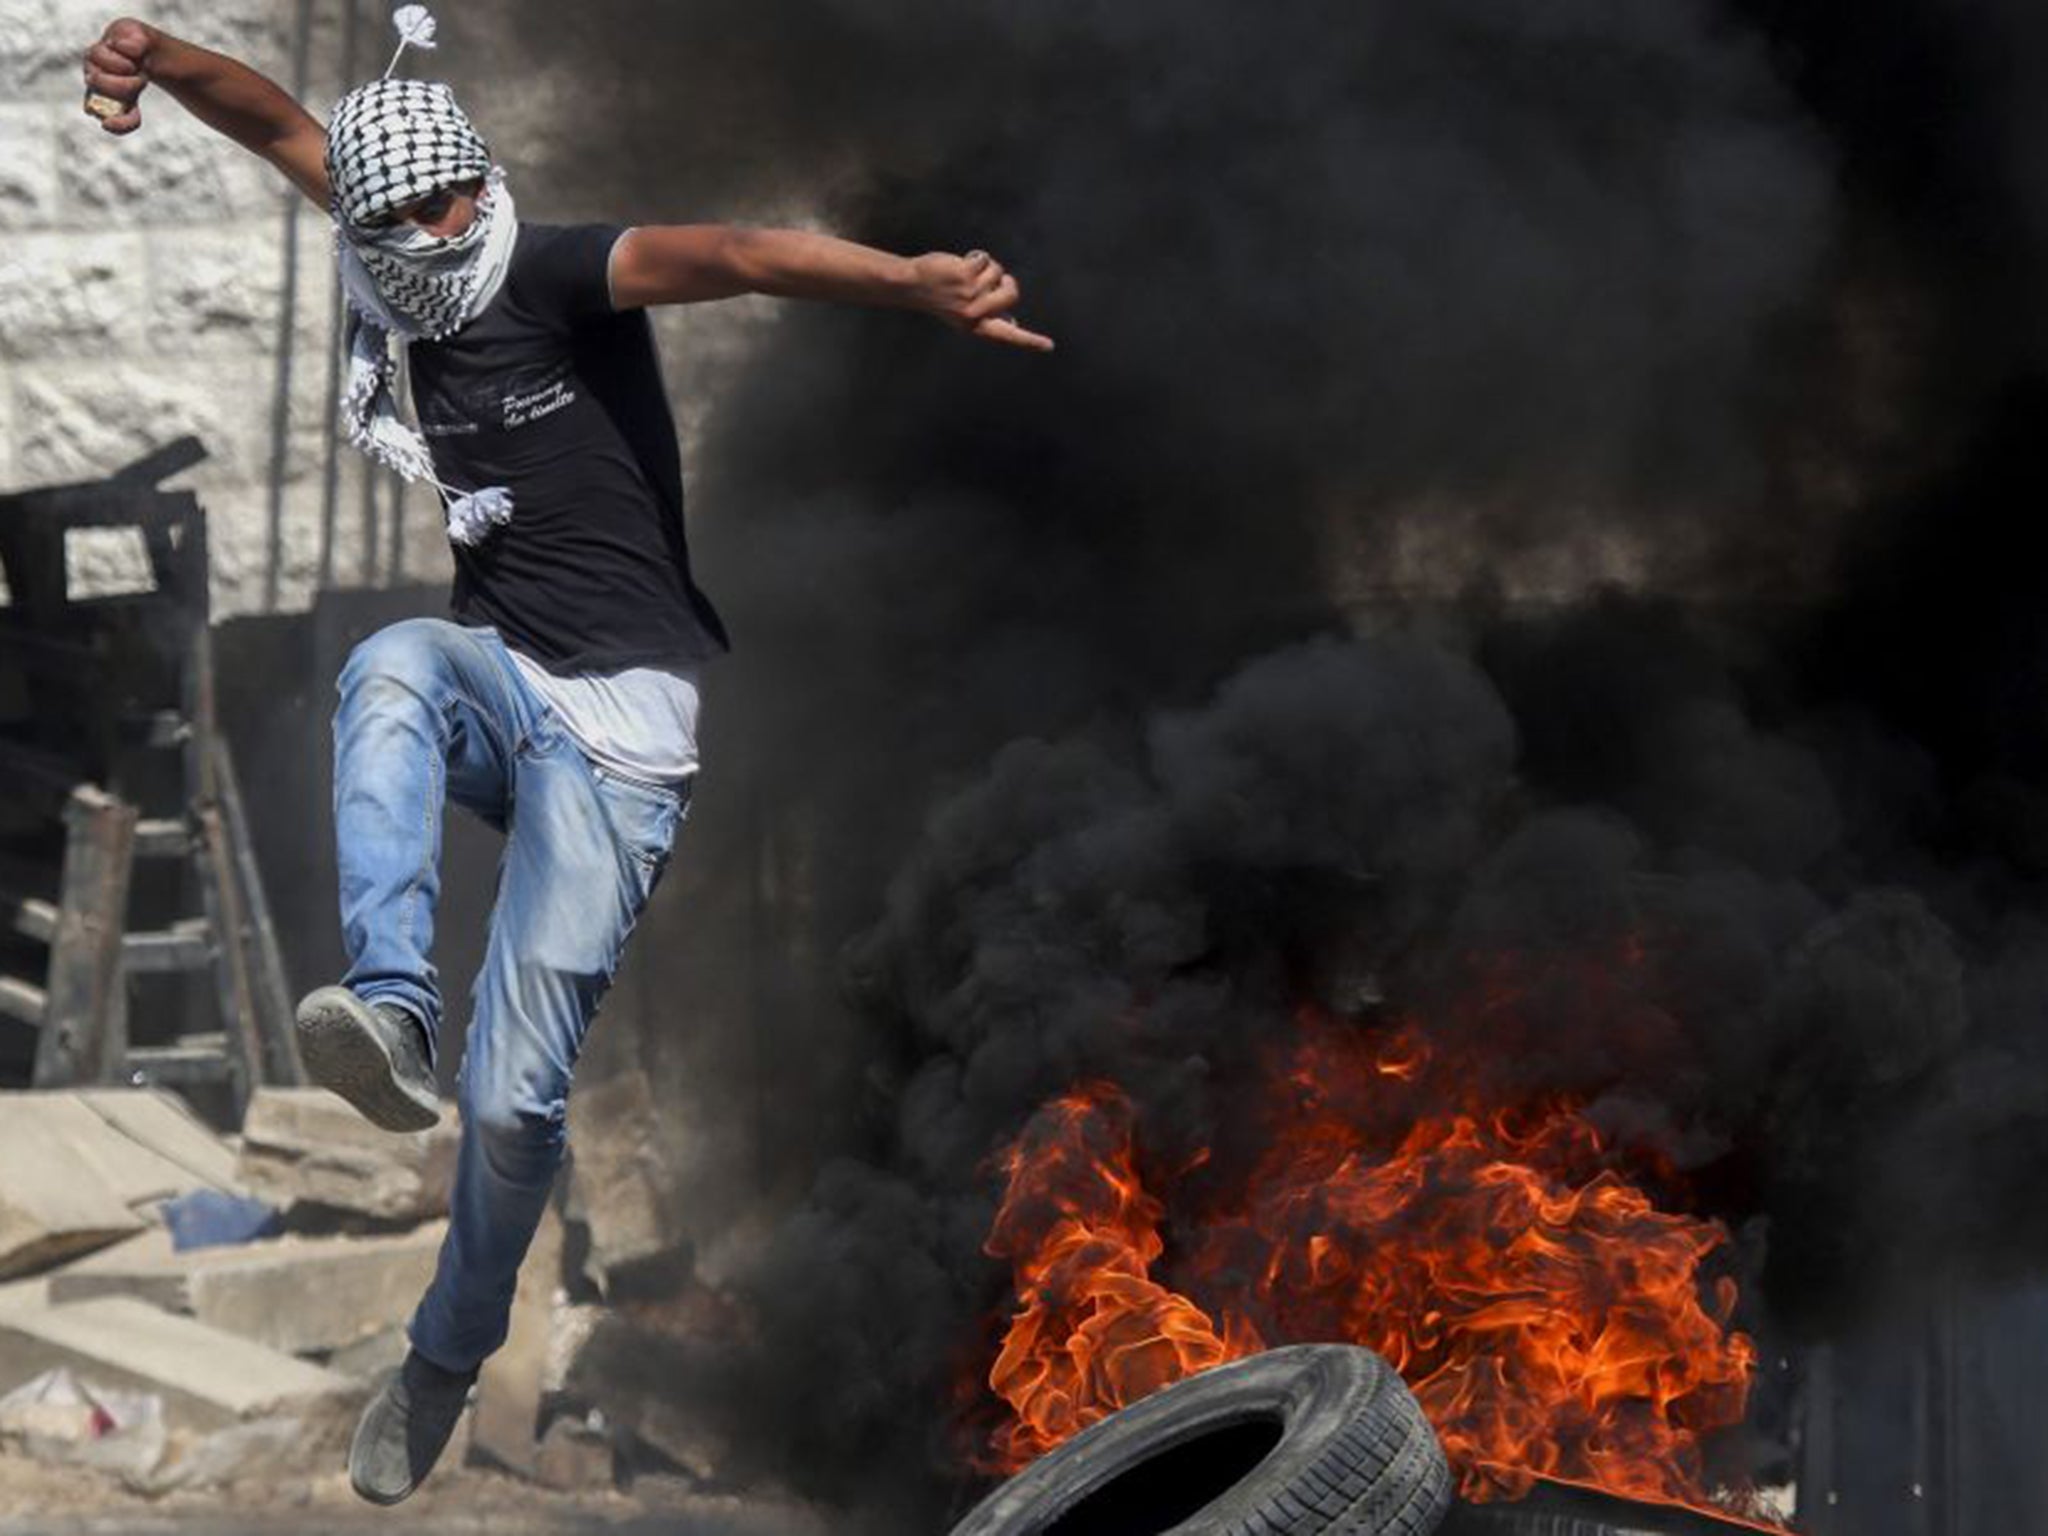 A man protests in Hebron about the fatal arson attack in Duma